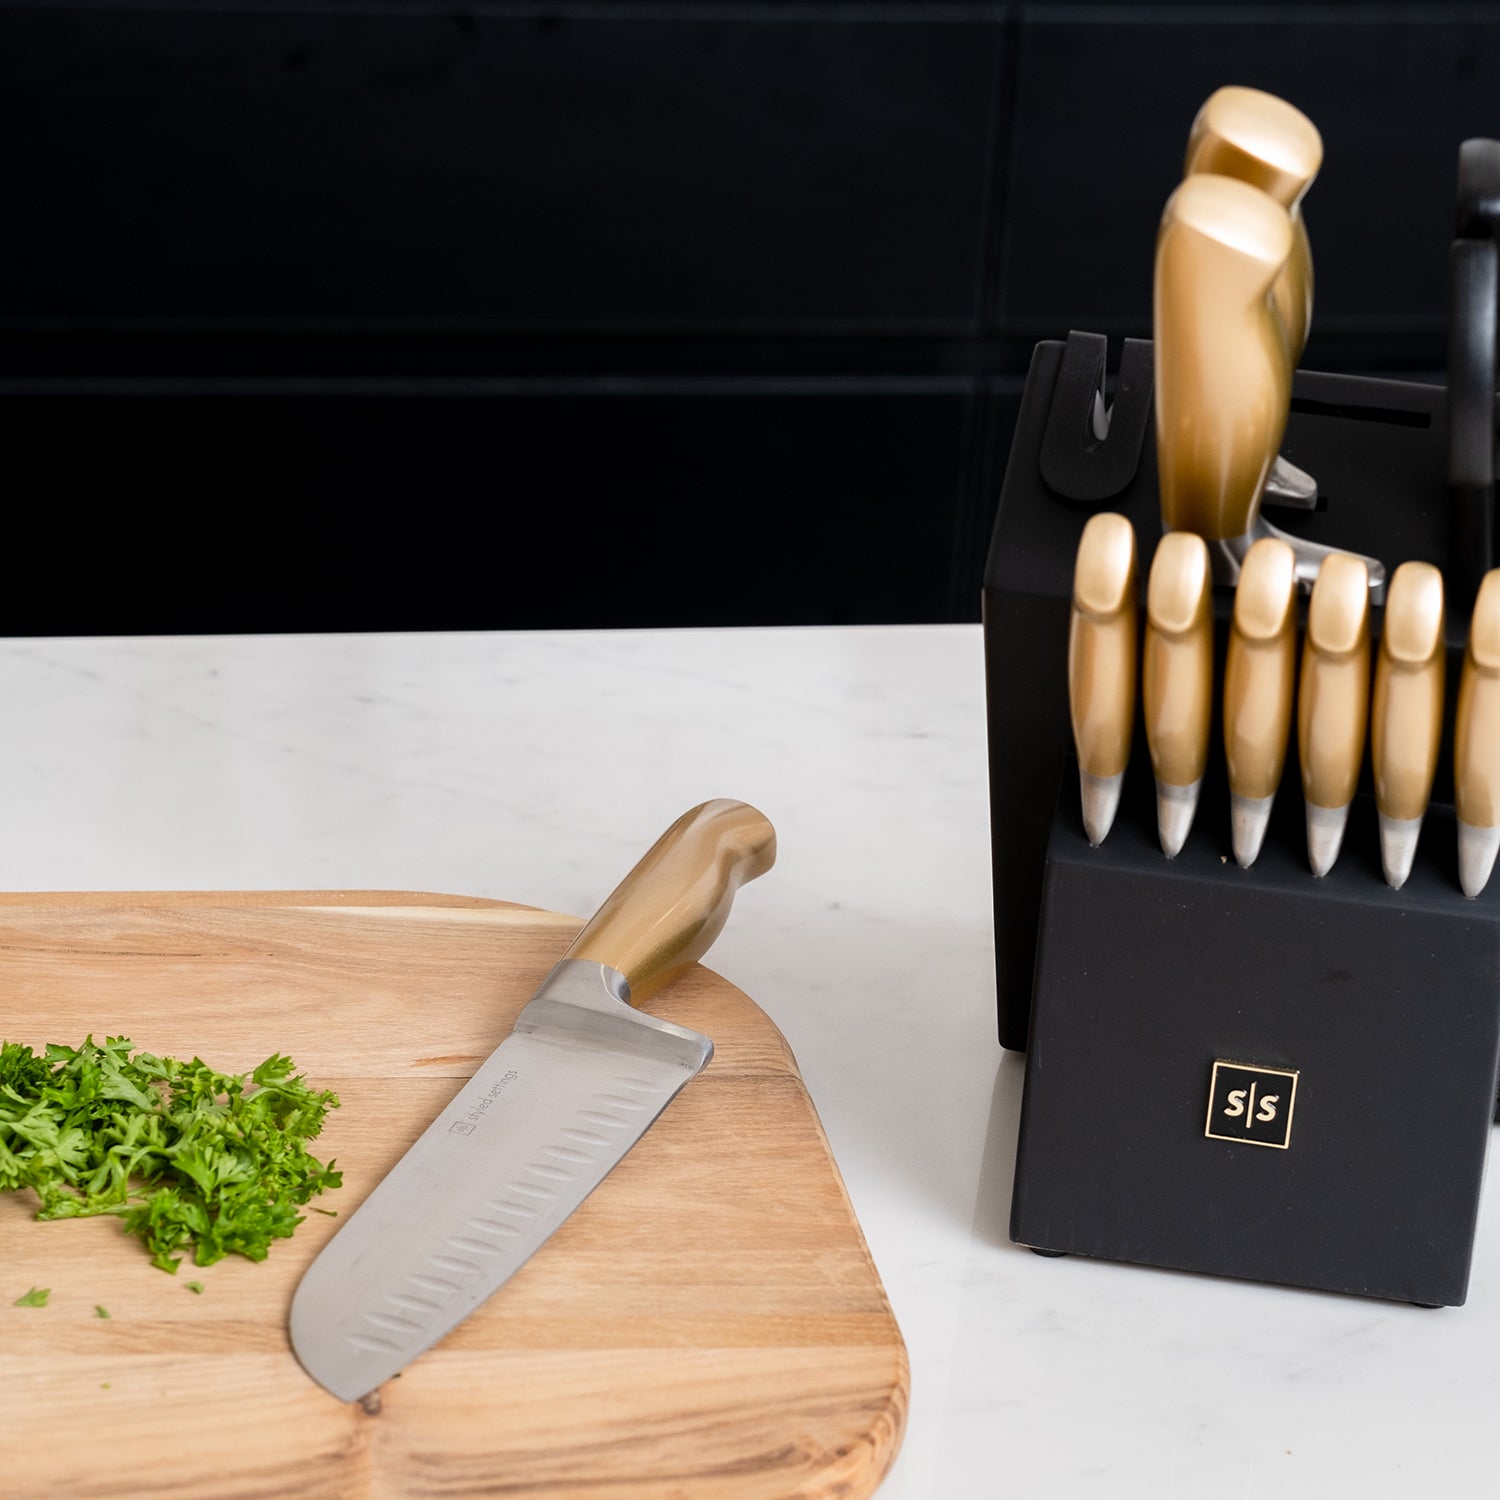 Gold and Silver Knife Set with Self-Sharpening Block - Styled Settings